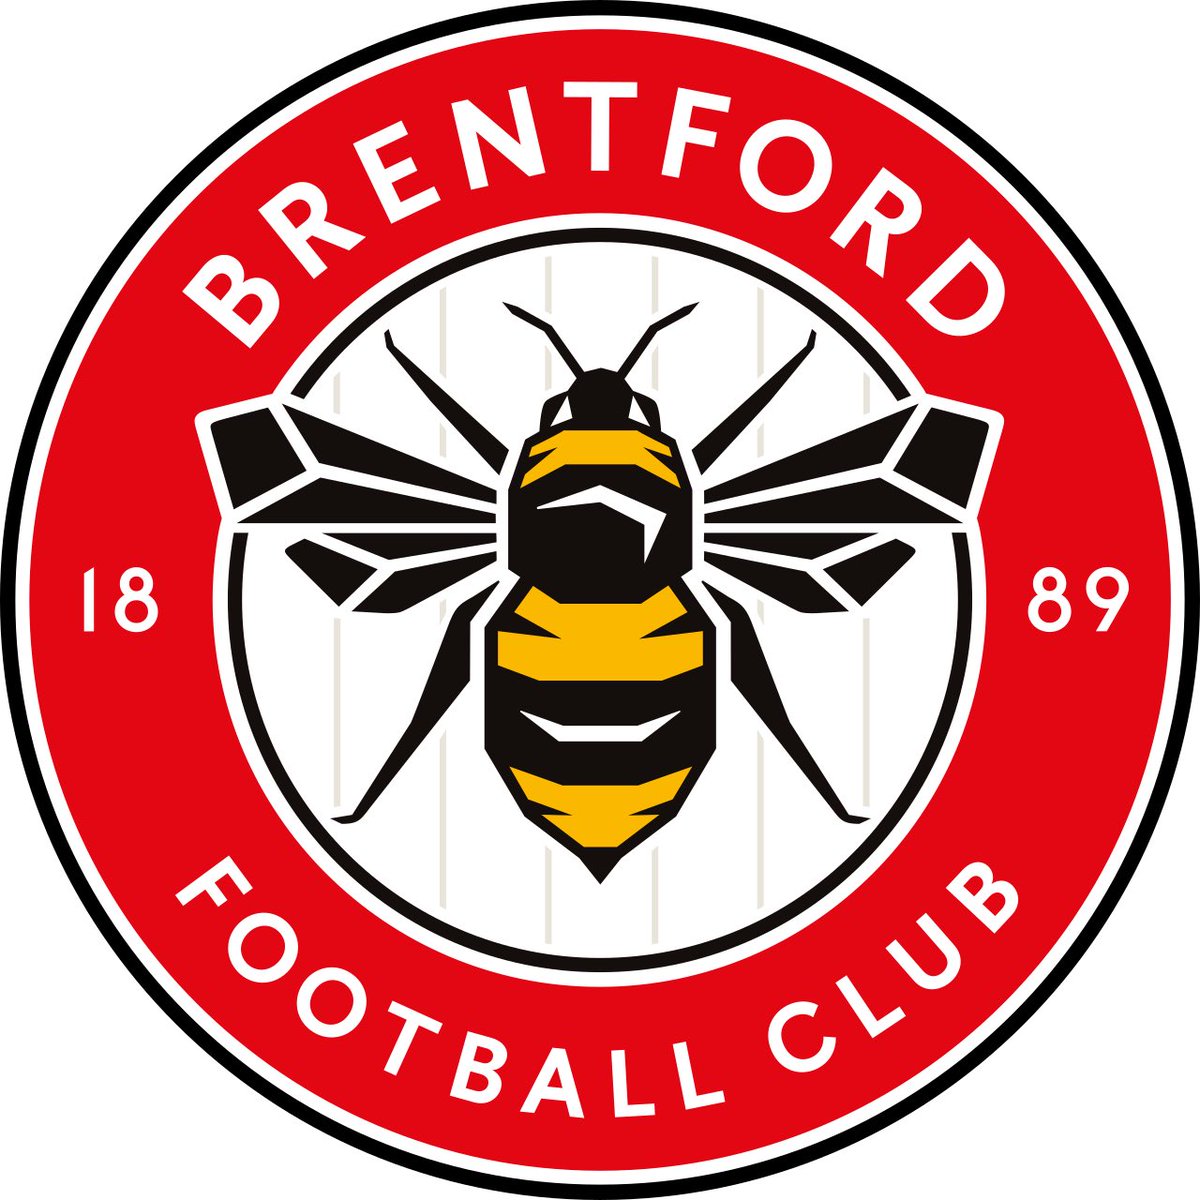 Brentford (A) now on sale to ST holders with 125+ Loyalty Points. 312 away supporters tickets remaining. The next points drop will be tomorrow at 2pm. #Newcastle #Brentford #NUFC #BFC